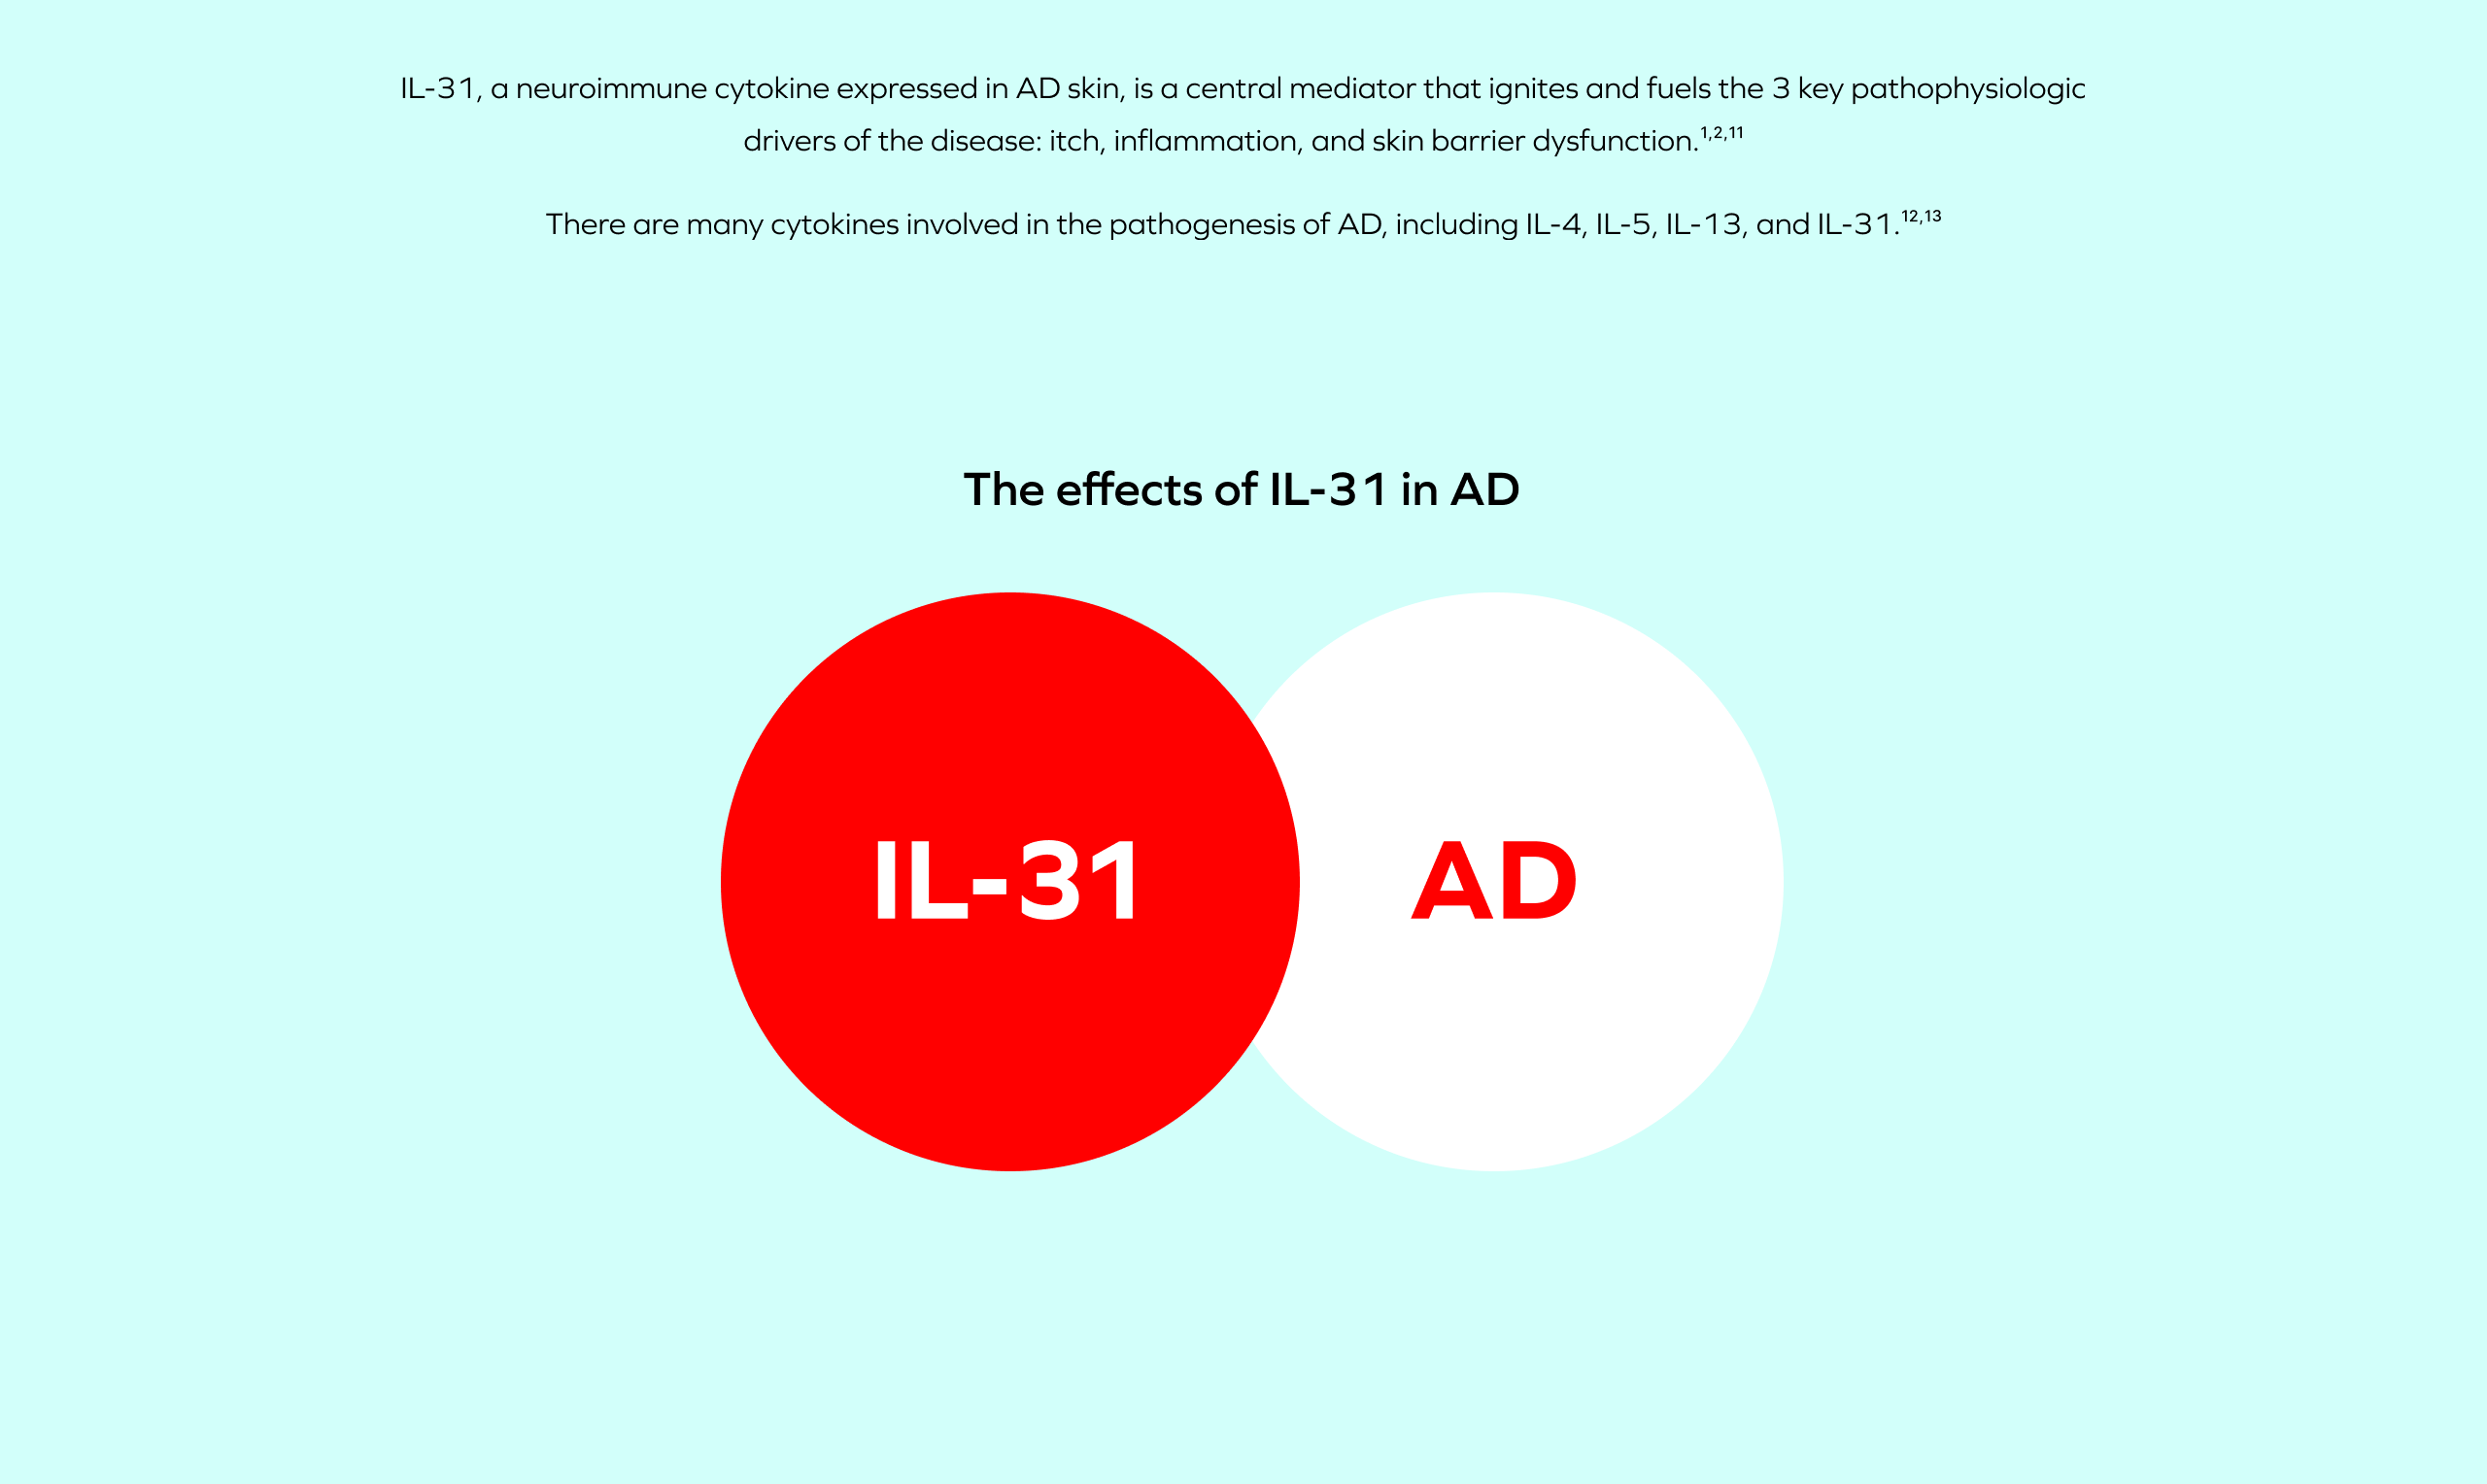 A red circle labeled "IL-31" that overlaps with a white circle labeled "AD."